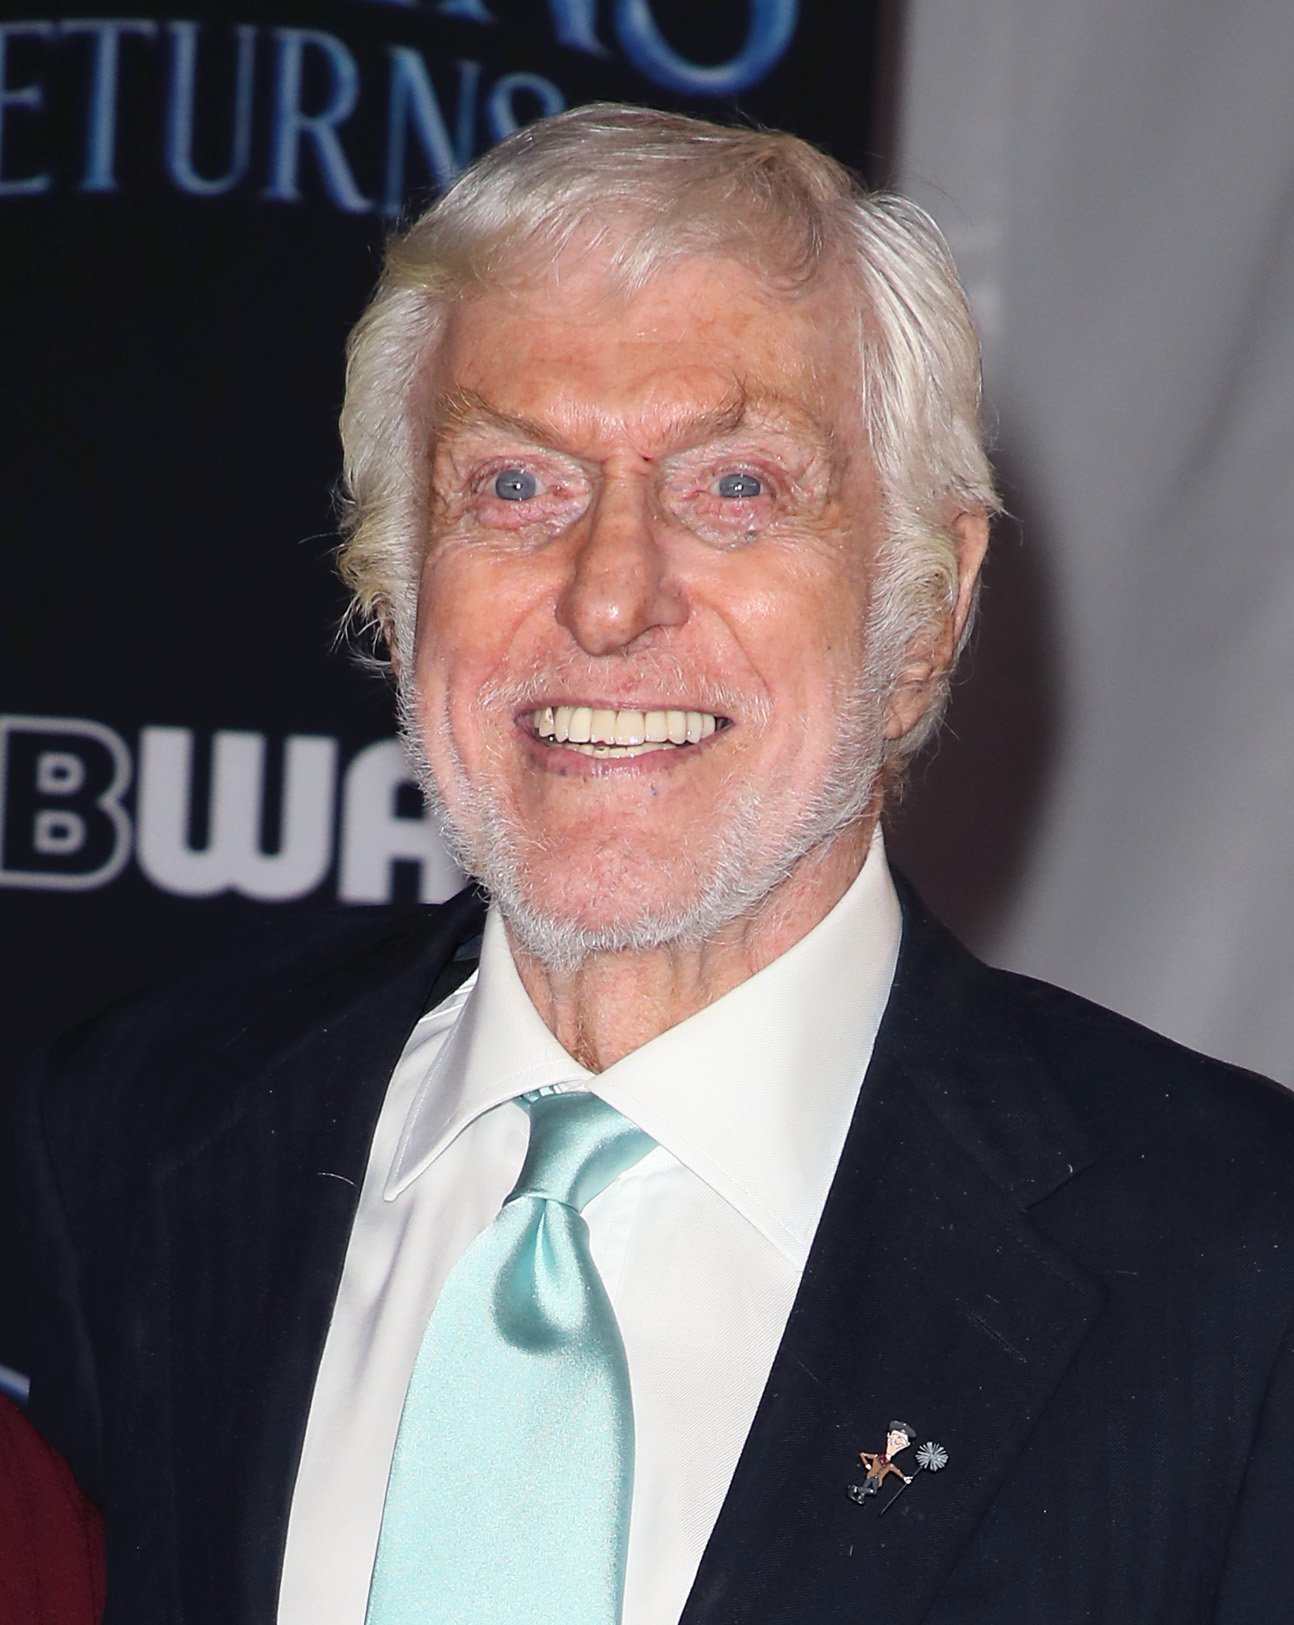 Dick Van Dyke attends the premiere of "Mary Poppins Returns" in Los Angeles, California on November 29, 2018 | Photo: Getty Images